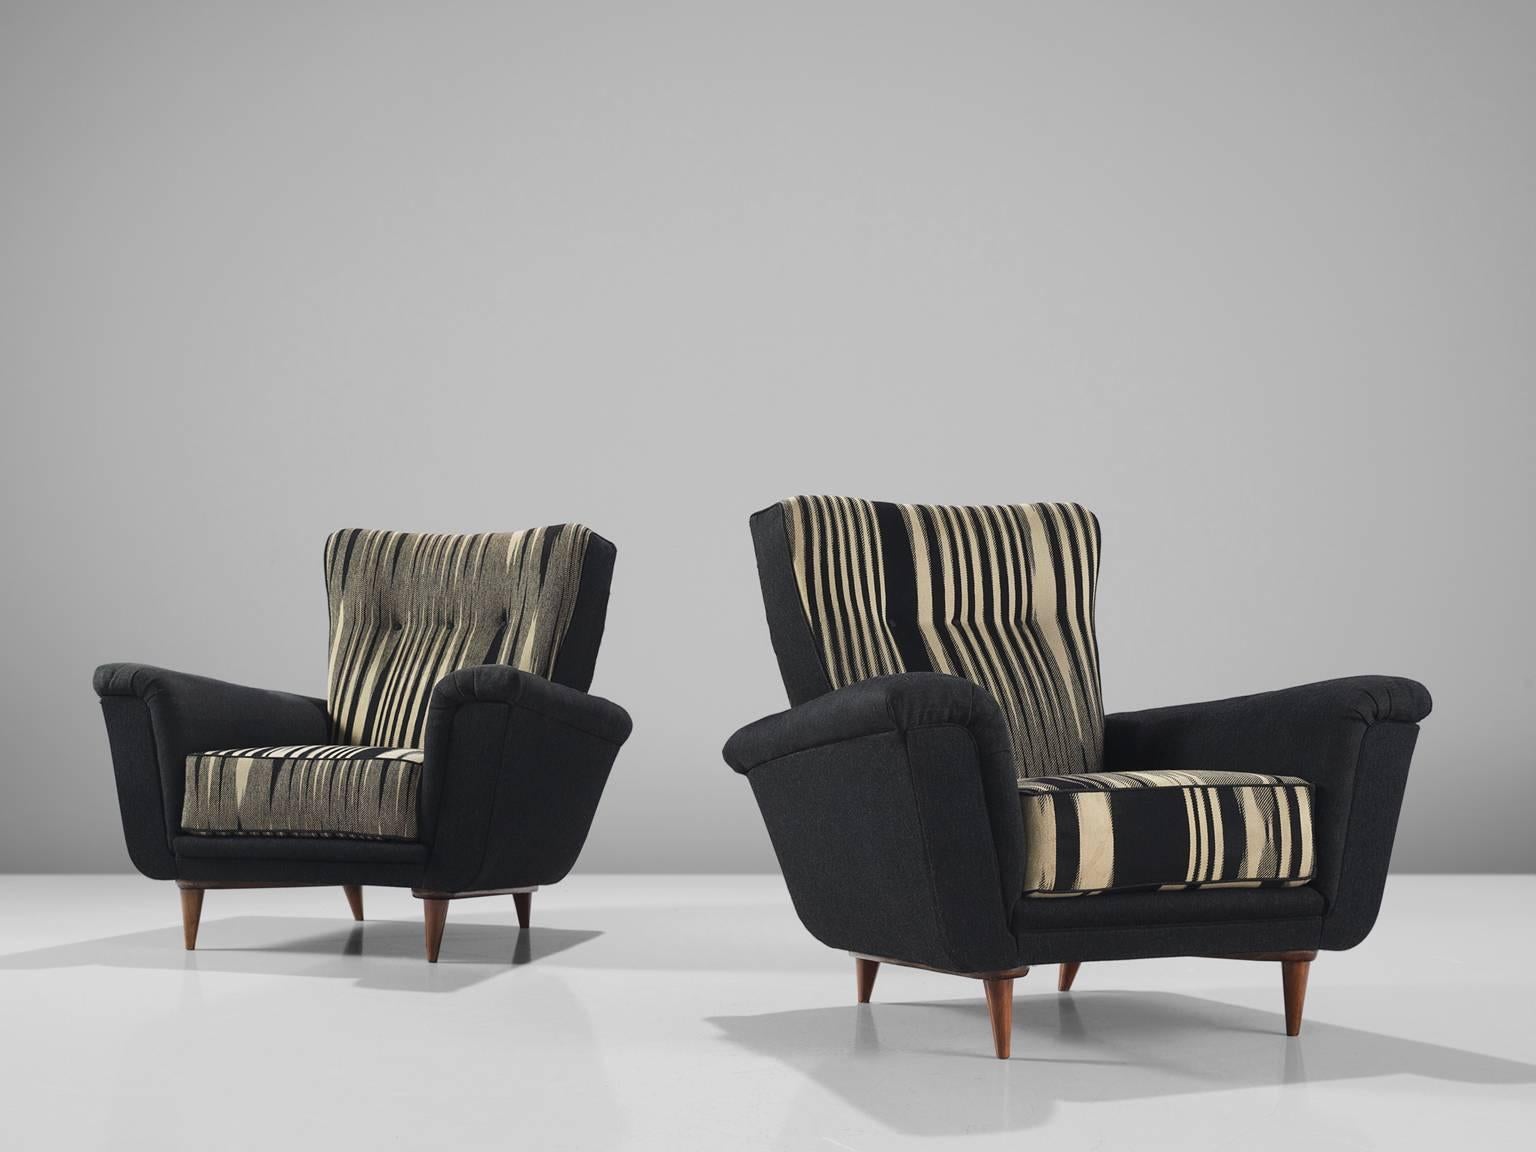 Artifort set of lounge chairs, black and white fabric, wood, The Netherlands, 1950s.

This set of chairs is an iconic example of Dutch design from the 1950s. The design is on the one hand simplistic, with elegant, subtle lines. On the other hand the